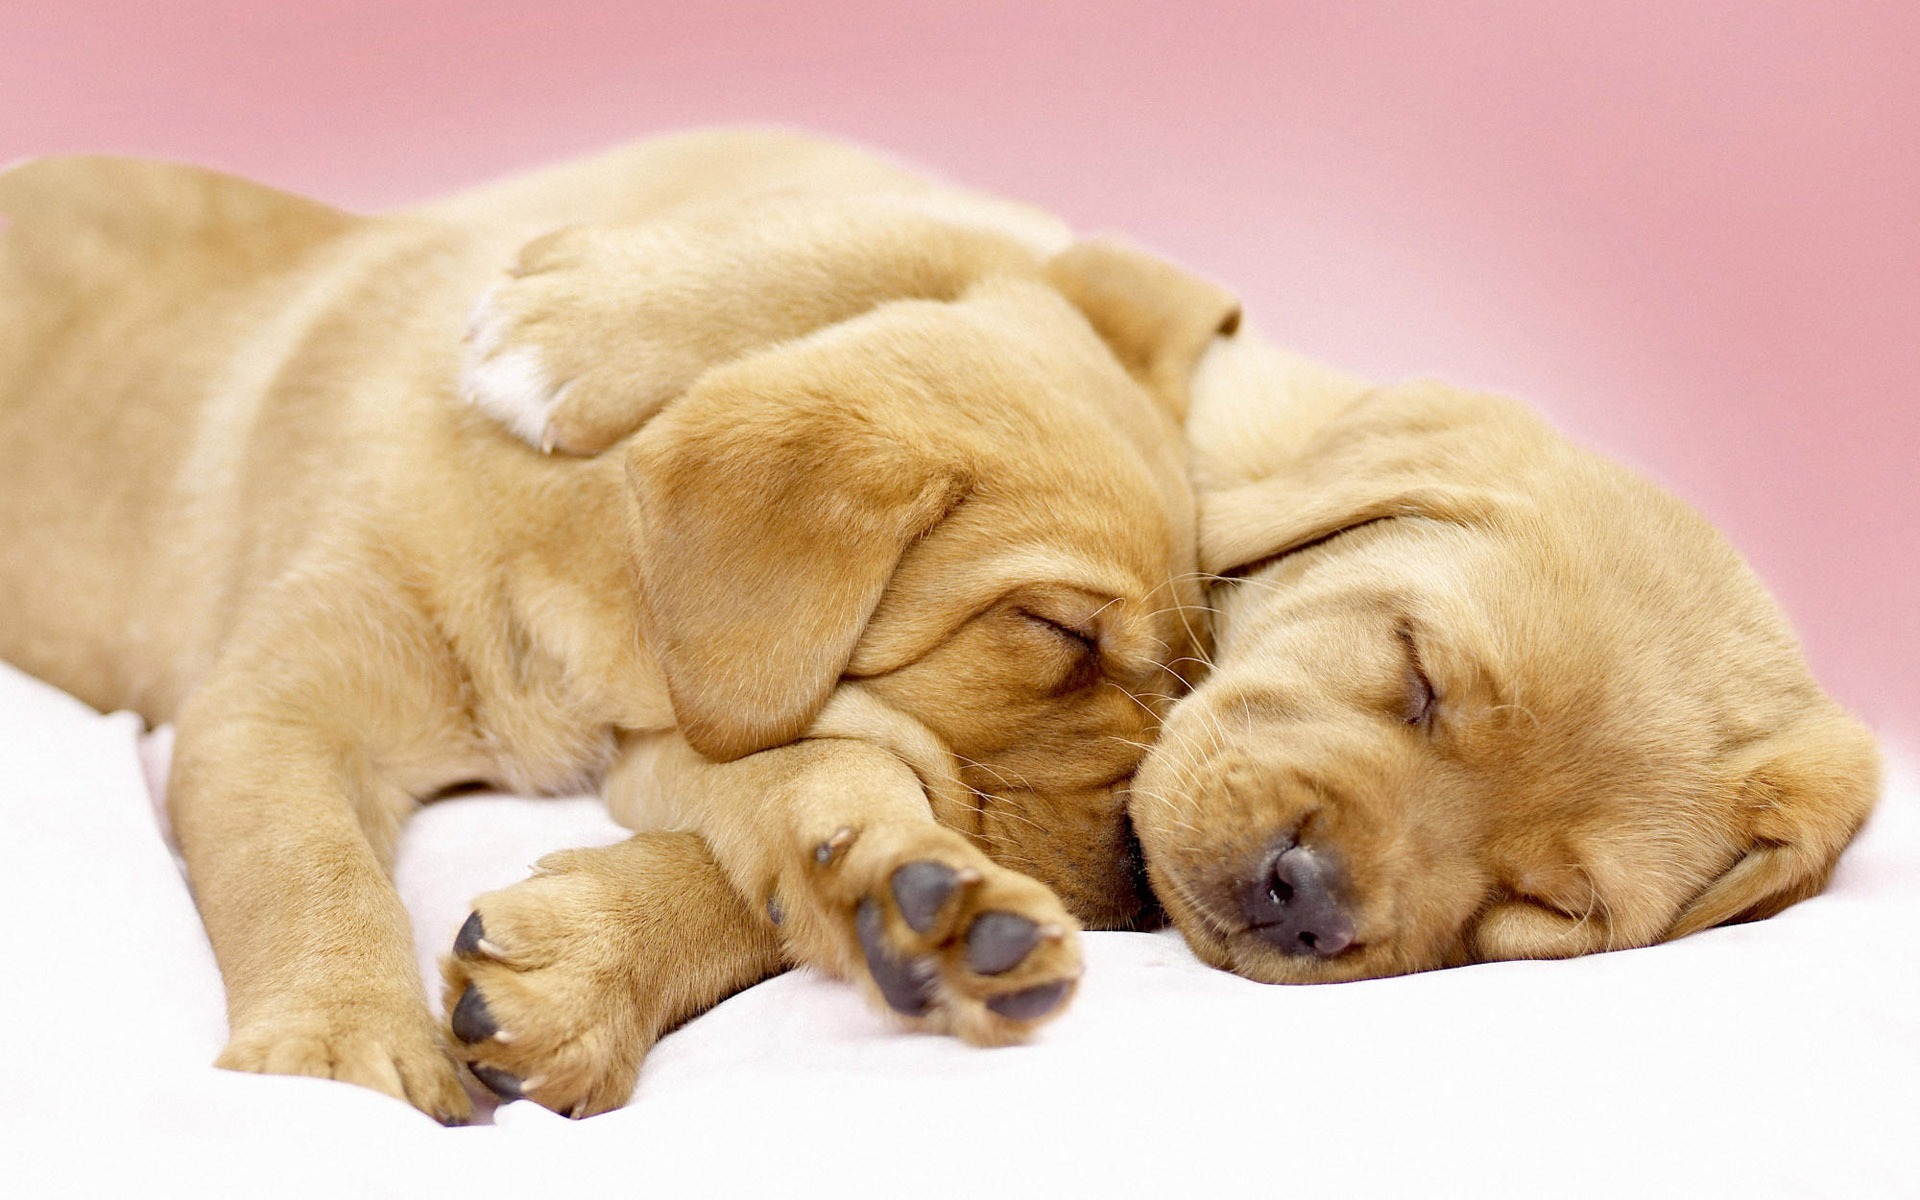 Puppy Photo HD wallpapers (7) #1 - 1920x1200